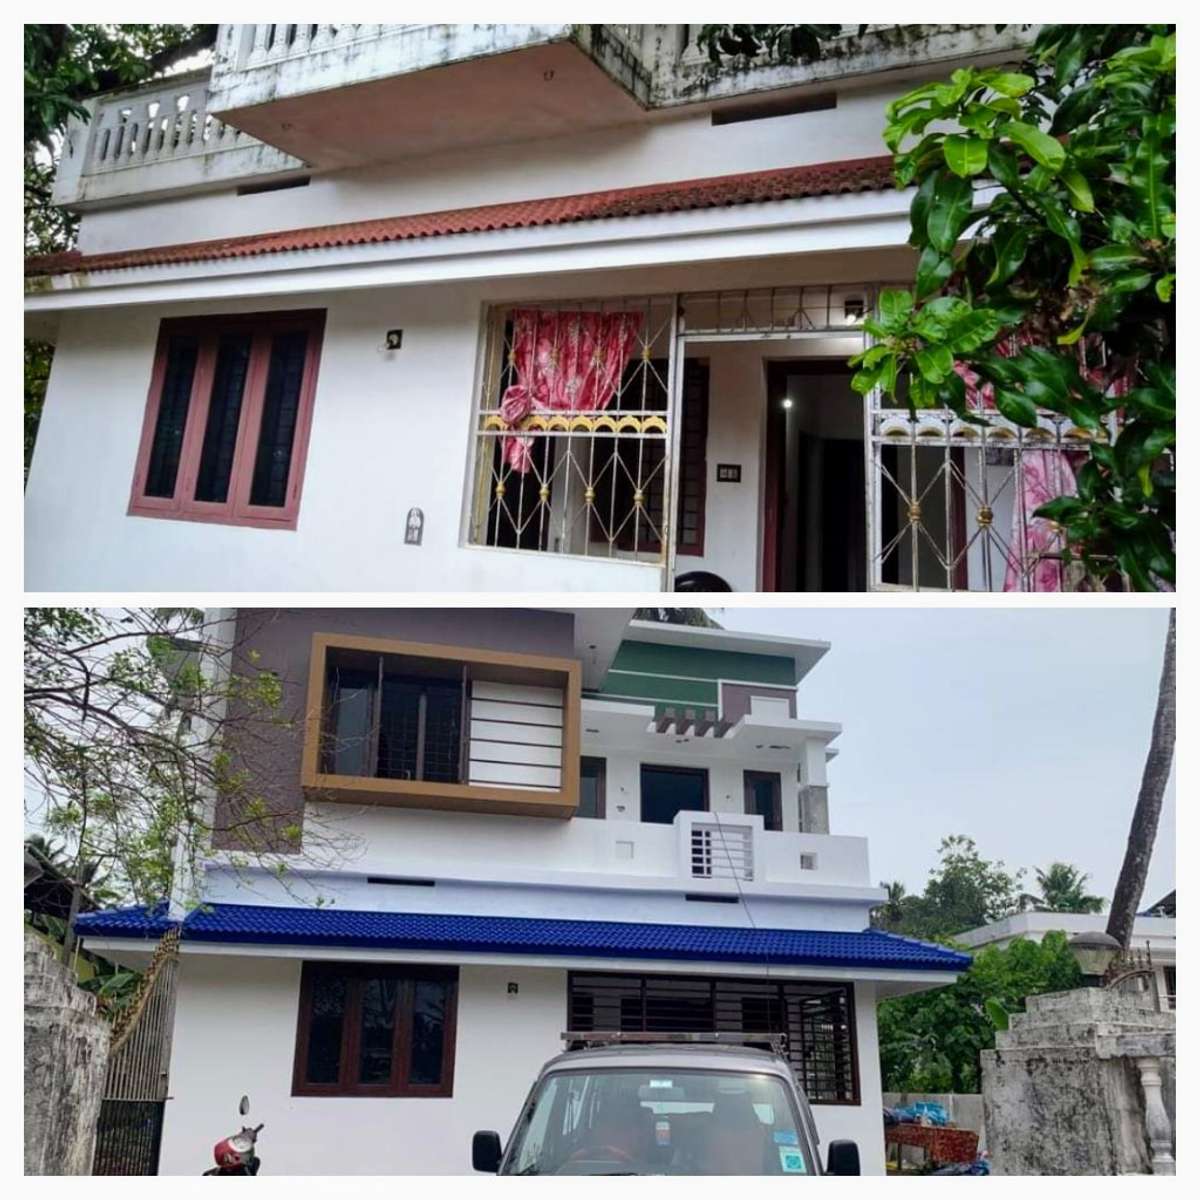 Designs by Contractor Global Housing, Thrissur | Kolo